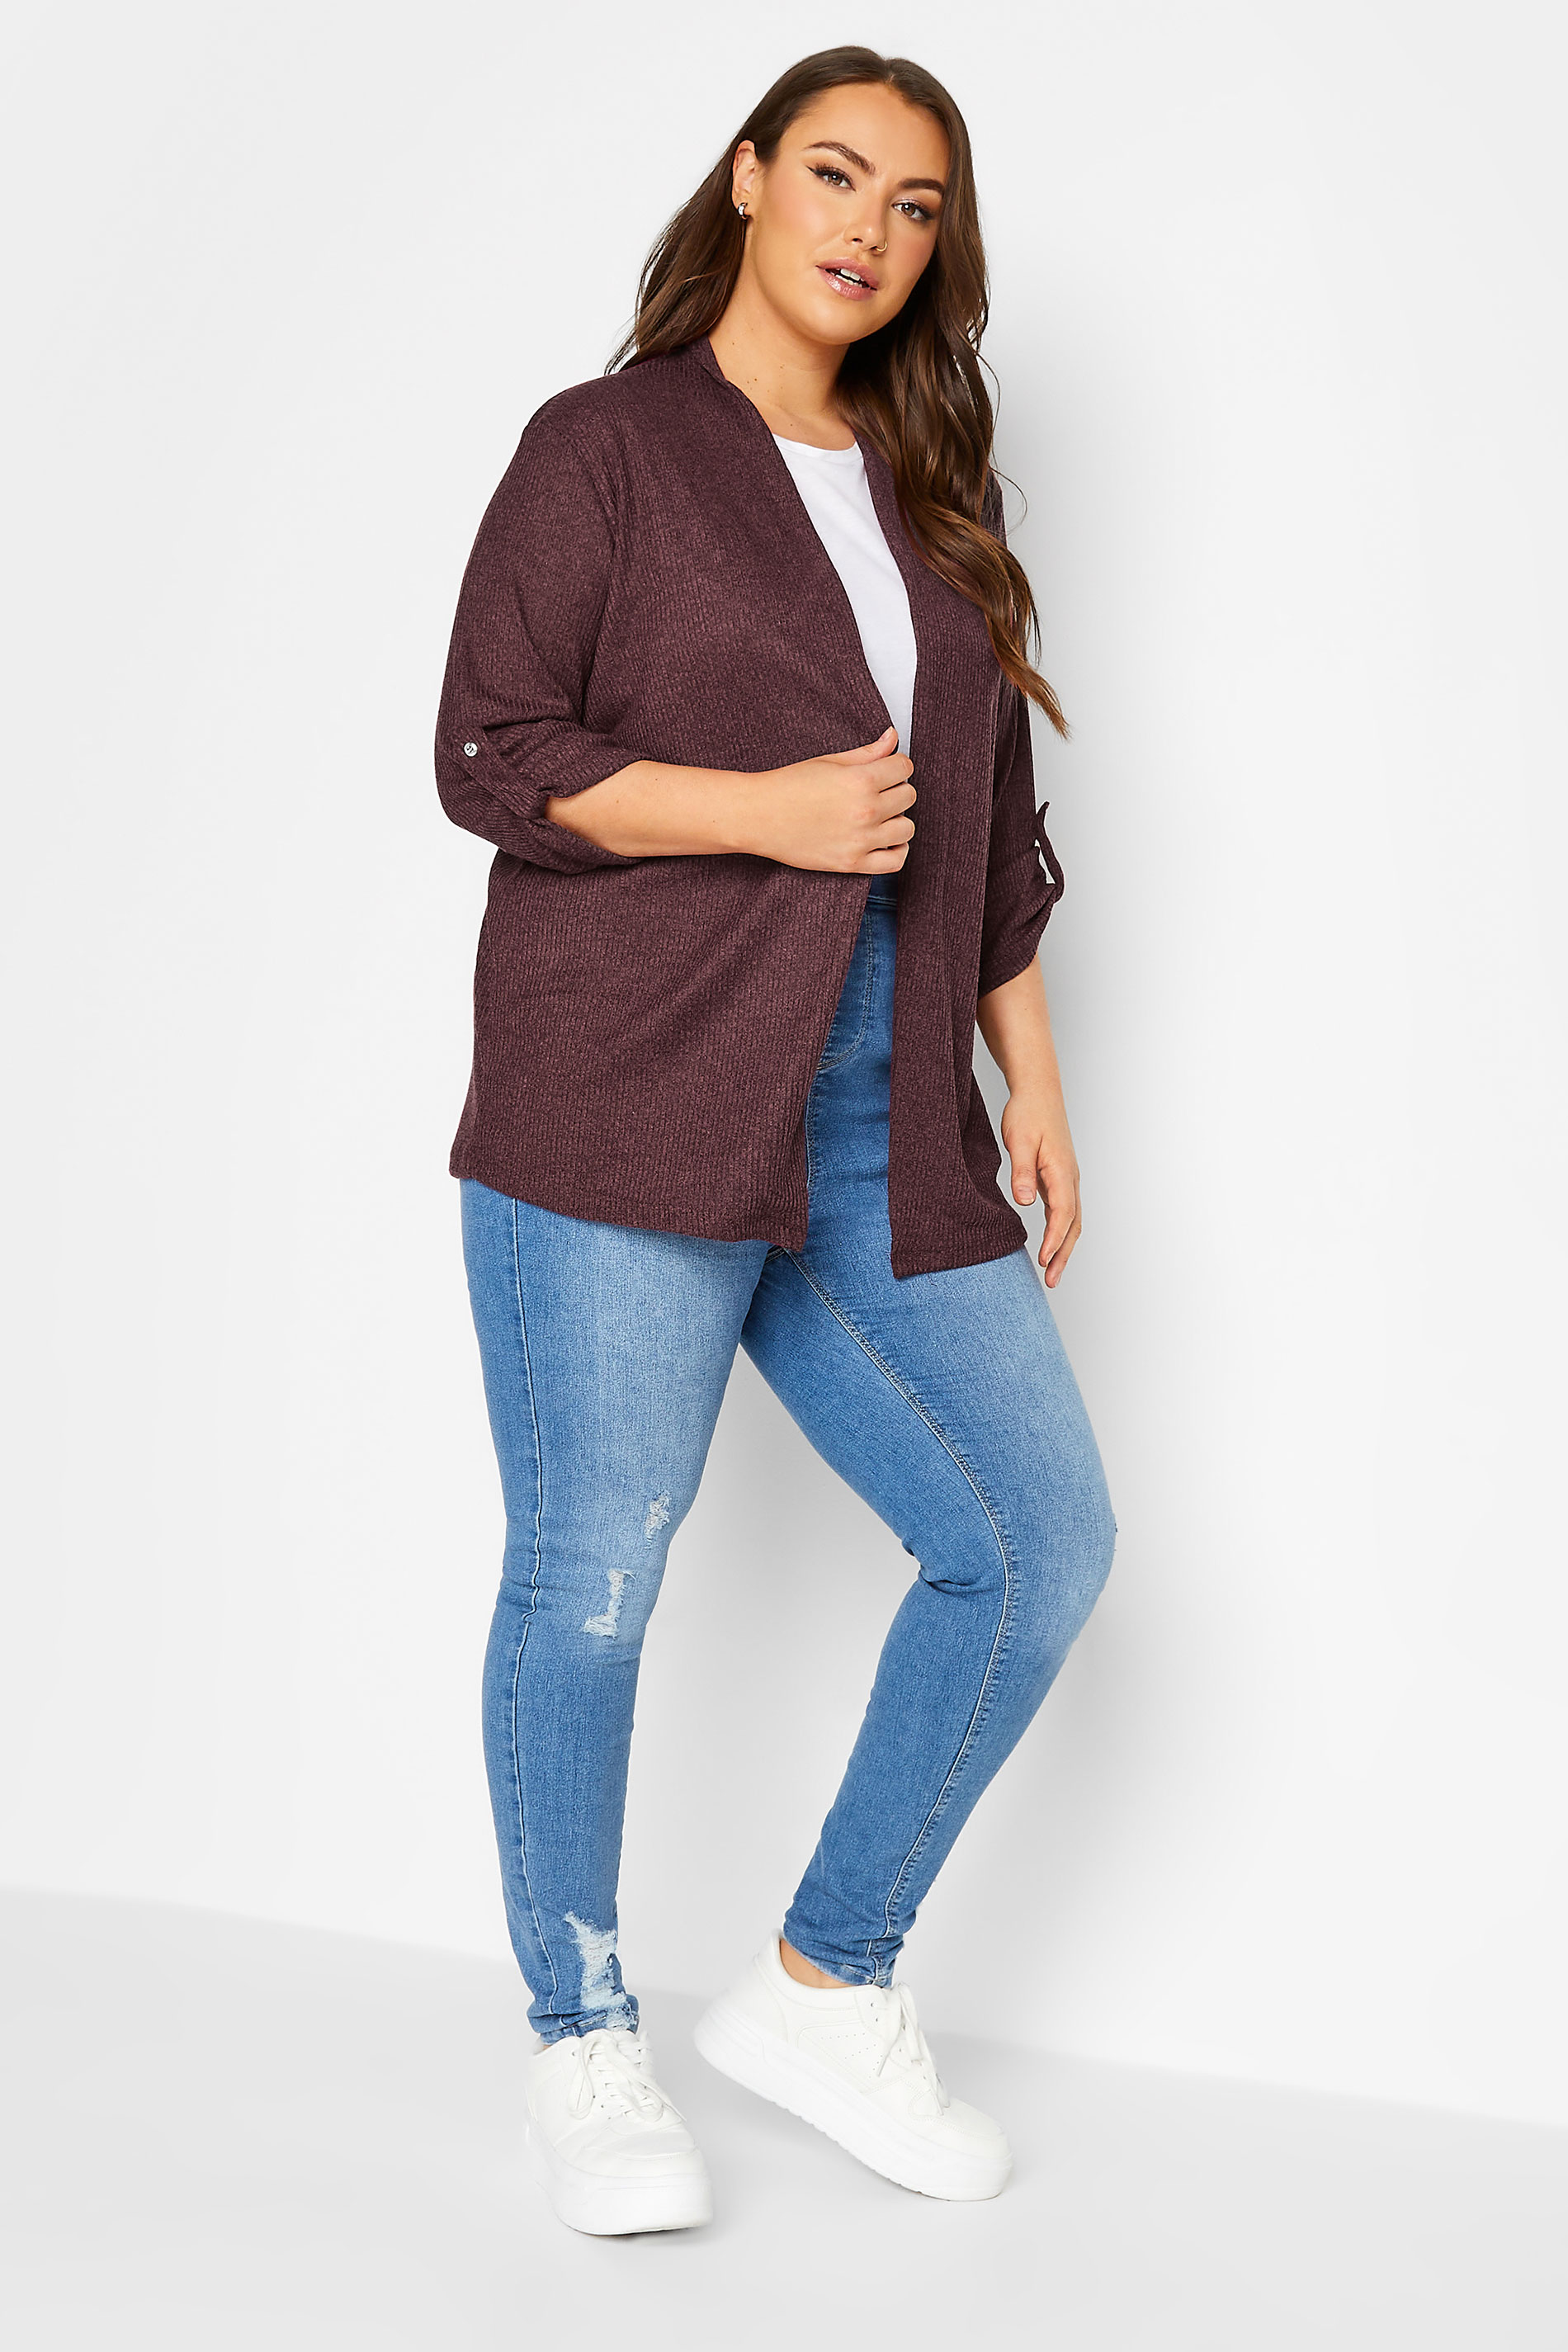 Curve Plus Size Womens Burgundy Red Knit Cardigan | Yours Clothing 2